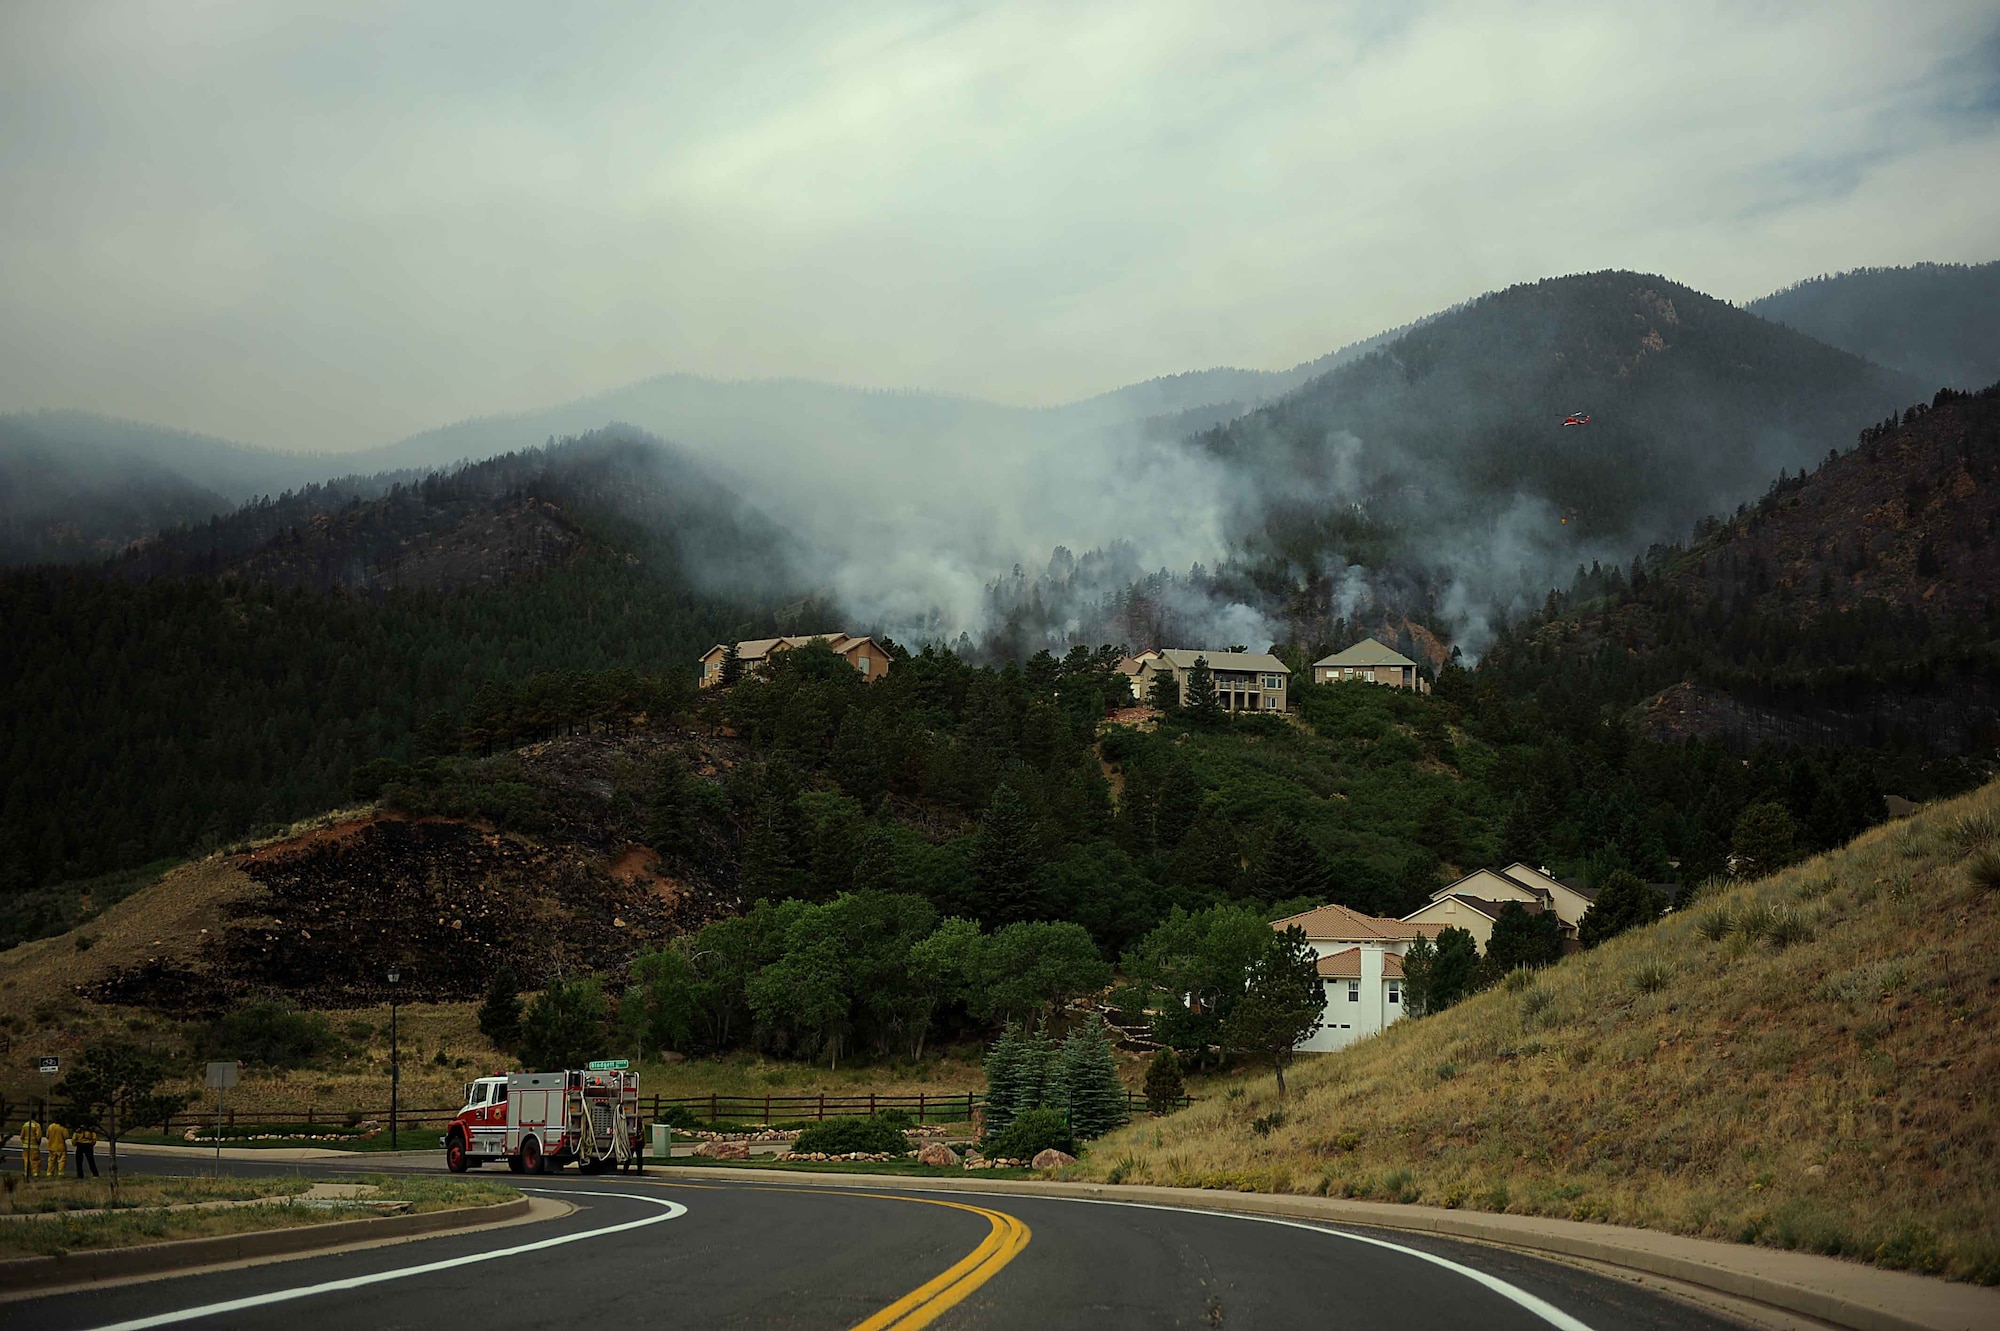 Fire still burns in the Mount Saint Francois area of Colorado Springs, Colo., while firefighters continue to battle several fires in Waldo Canyon on June 28, 2012. Currently, more than 90 firefighters from the Academy, along with assets from Air Force Space Command; F.E. Warren Air Force Base, Wyo.; Fort Carson, Colo.; and the local community continue to fight the Waldo Canyon fire.(U.S. Air Force photo/Master Sgt. Jeremy Lock)